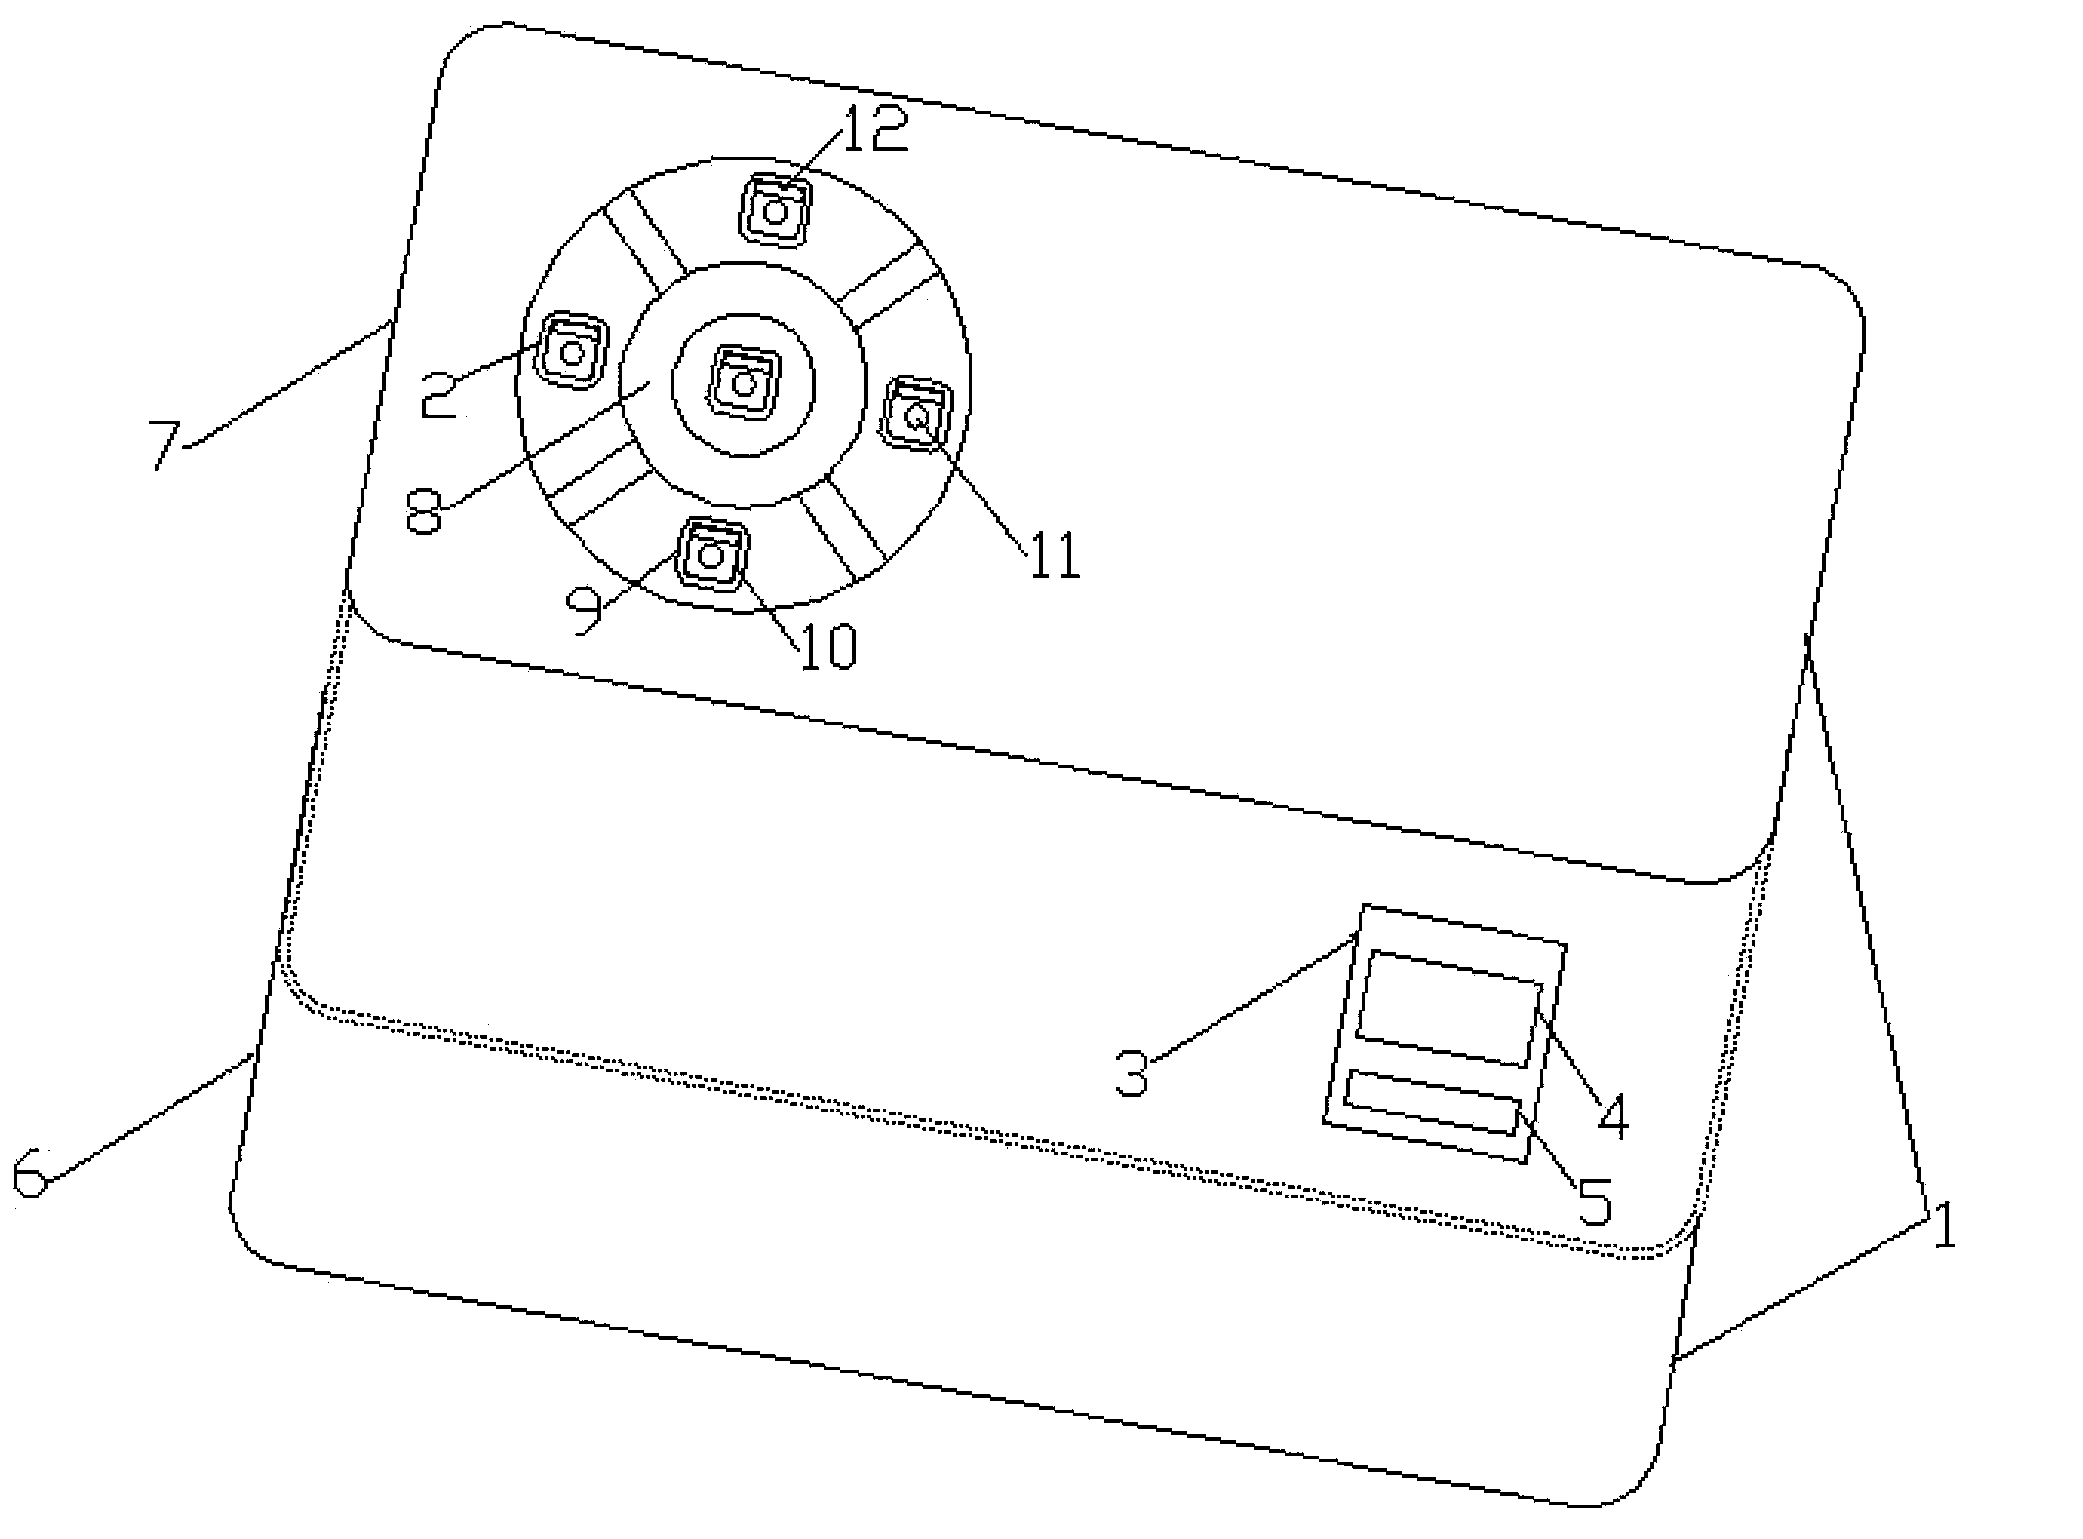 Wireless video sharing playing device and method